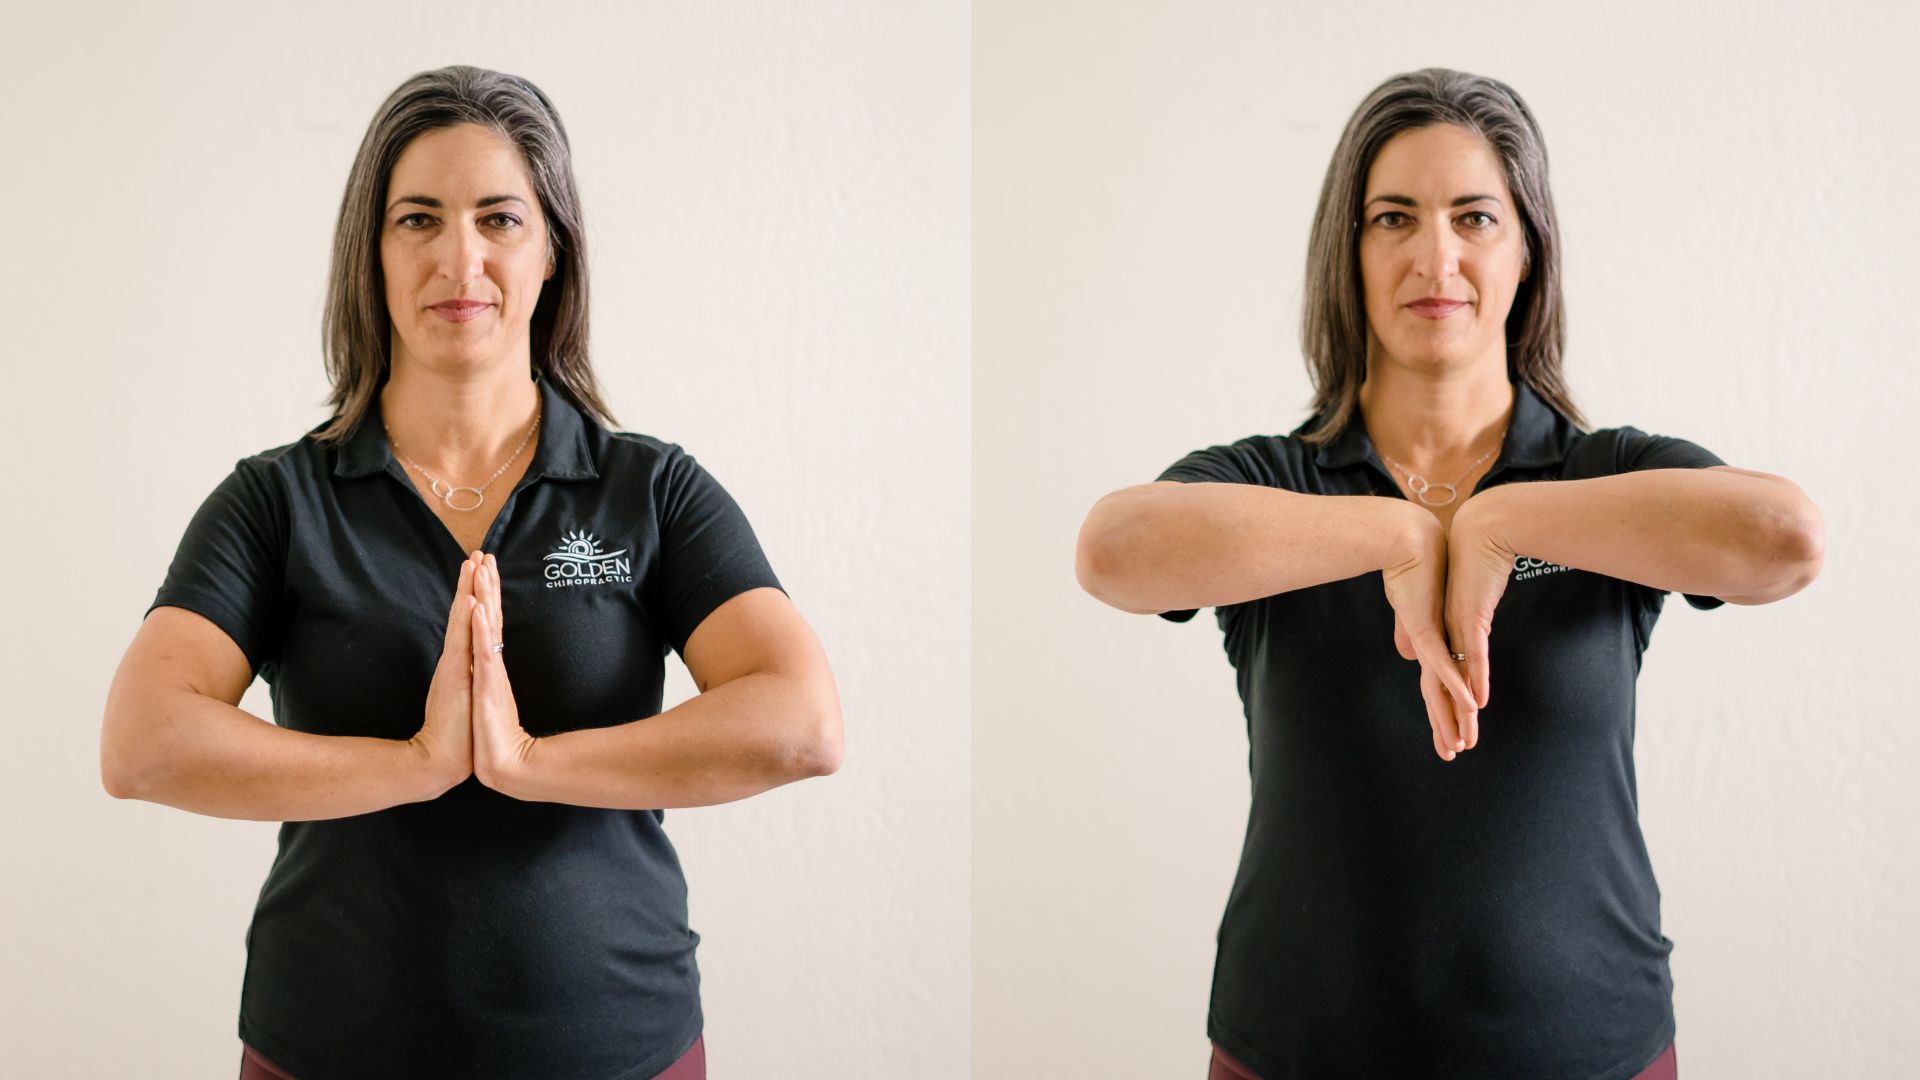 Dr Goldi demonstrates the prayer and reverse prayer stretches